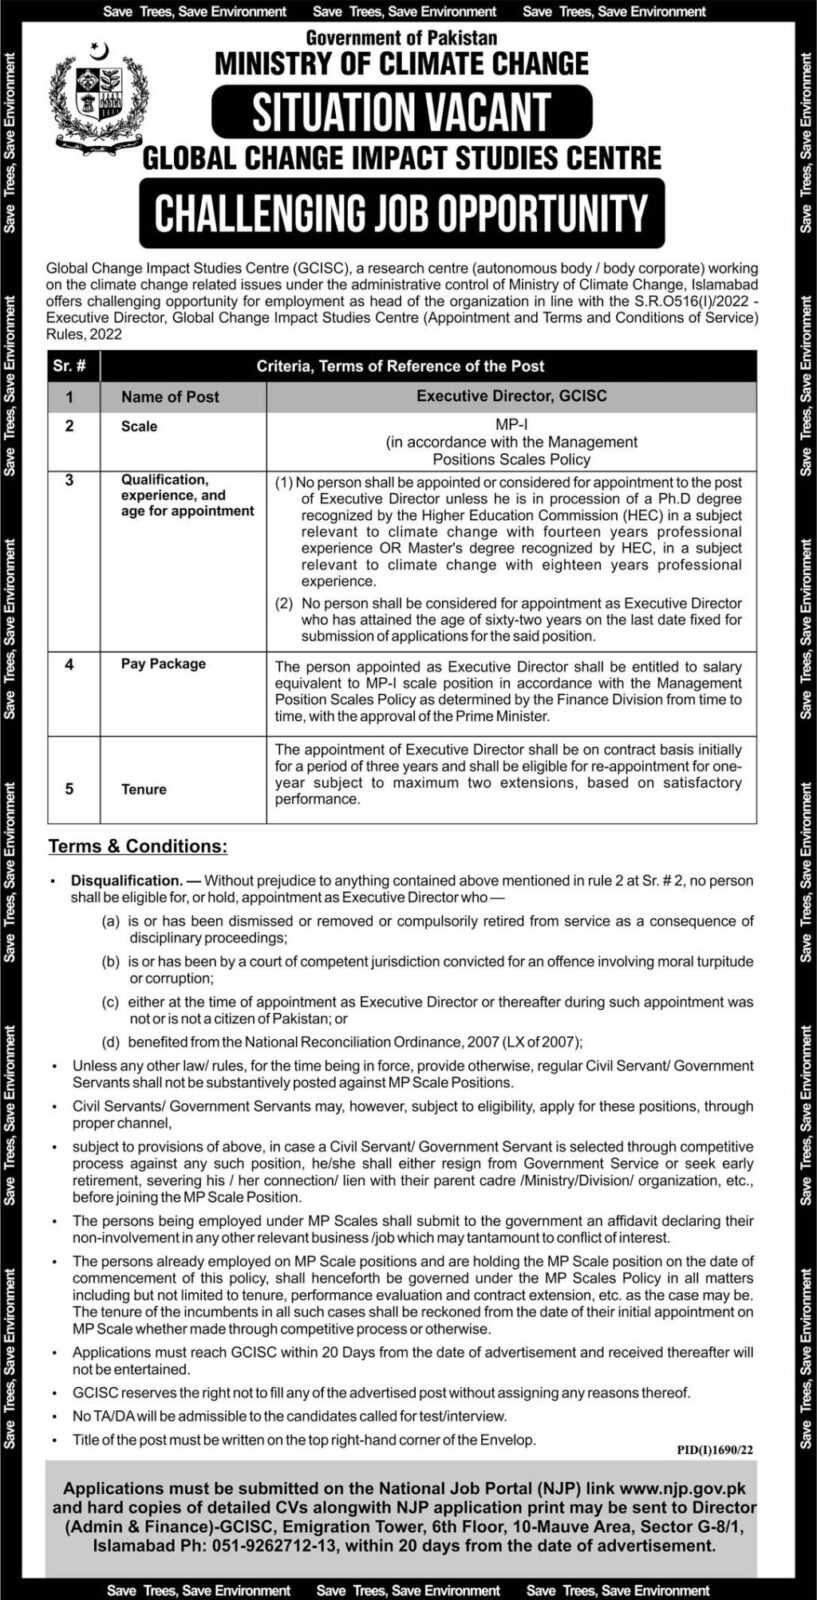 Jobs at GCISC Ministry of Climate Change 2022